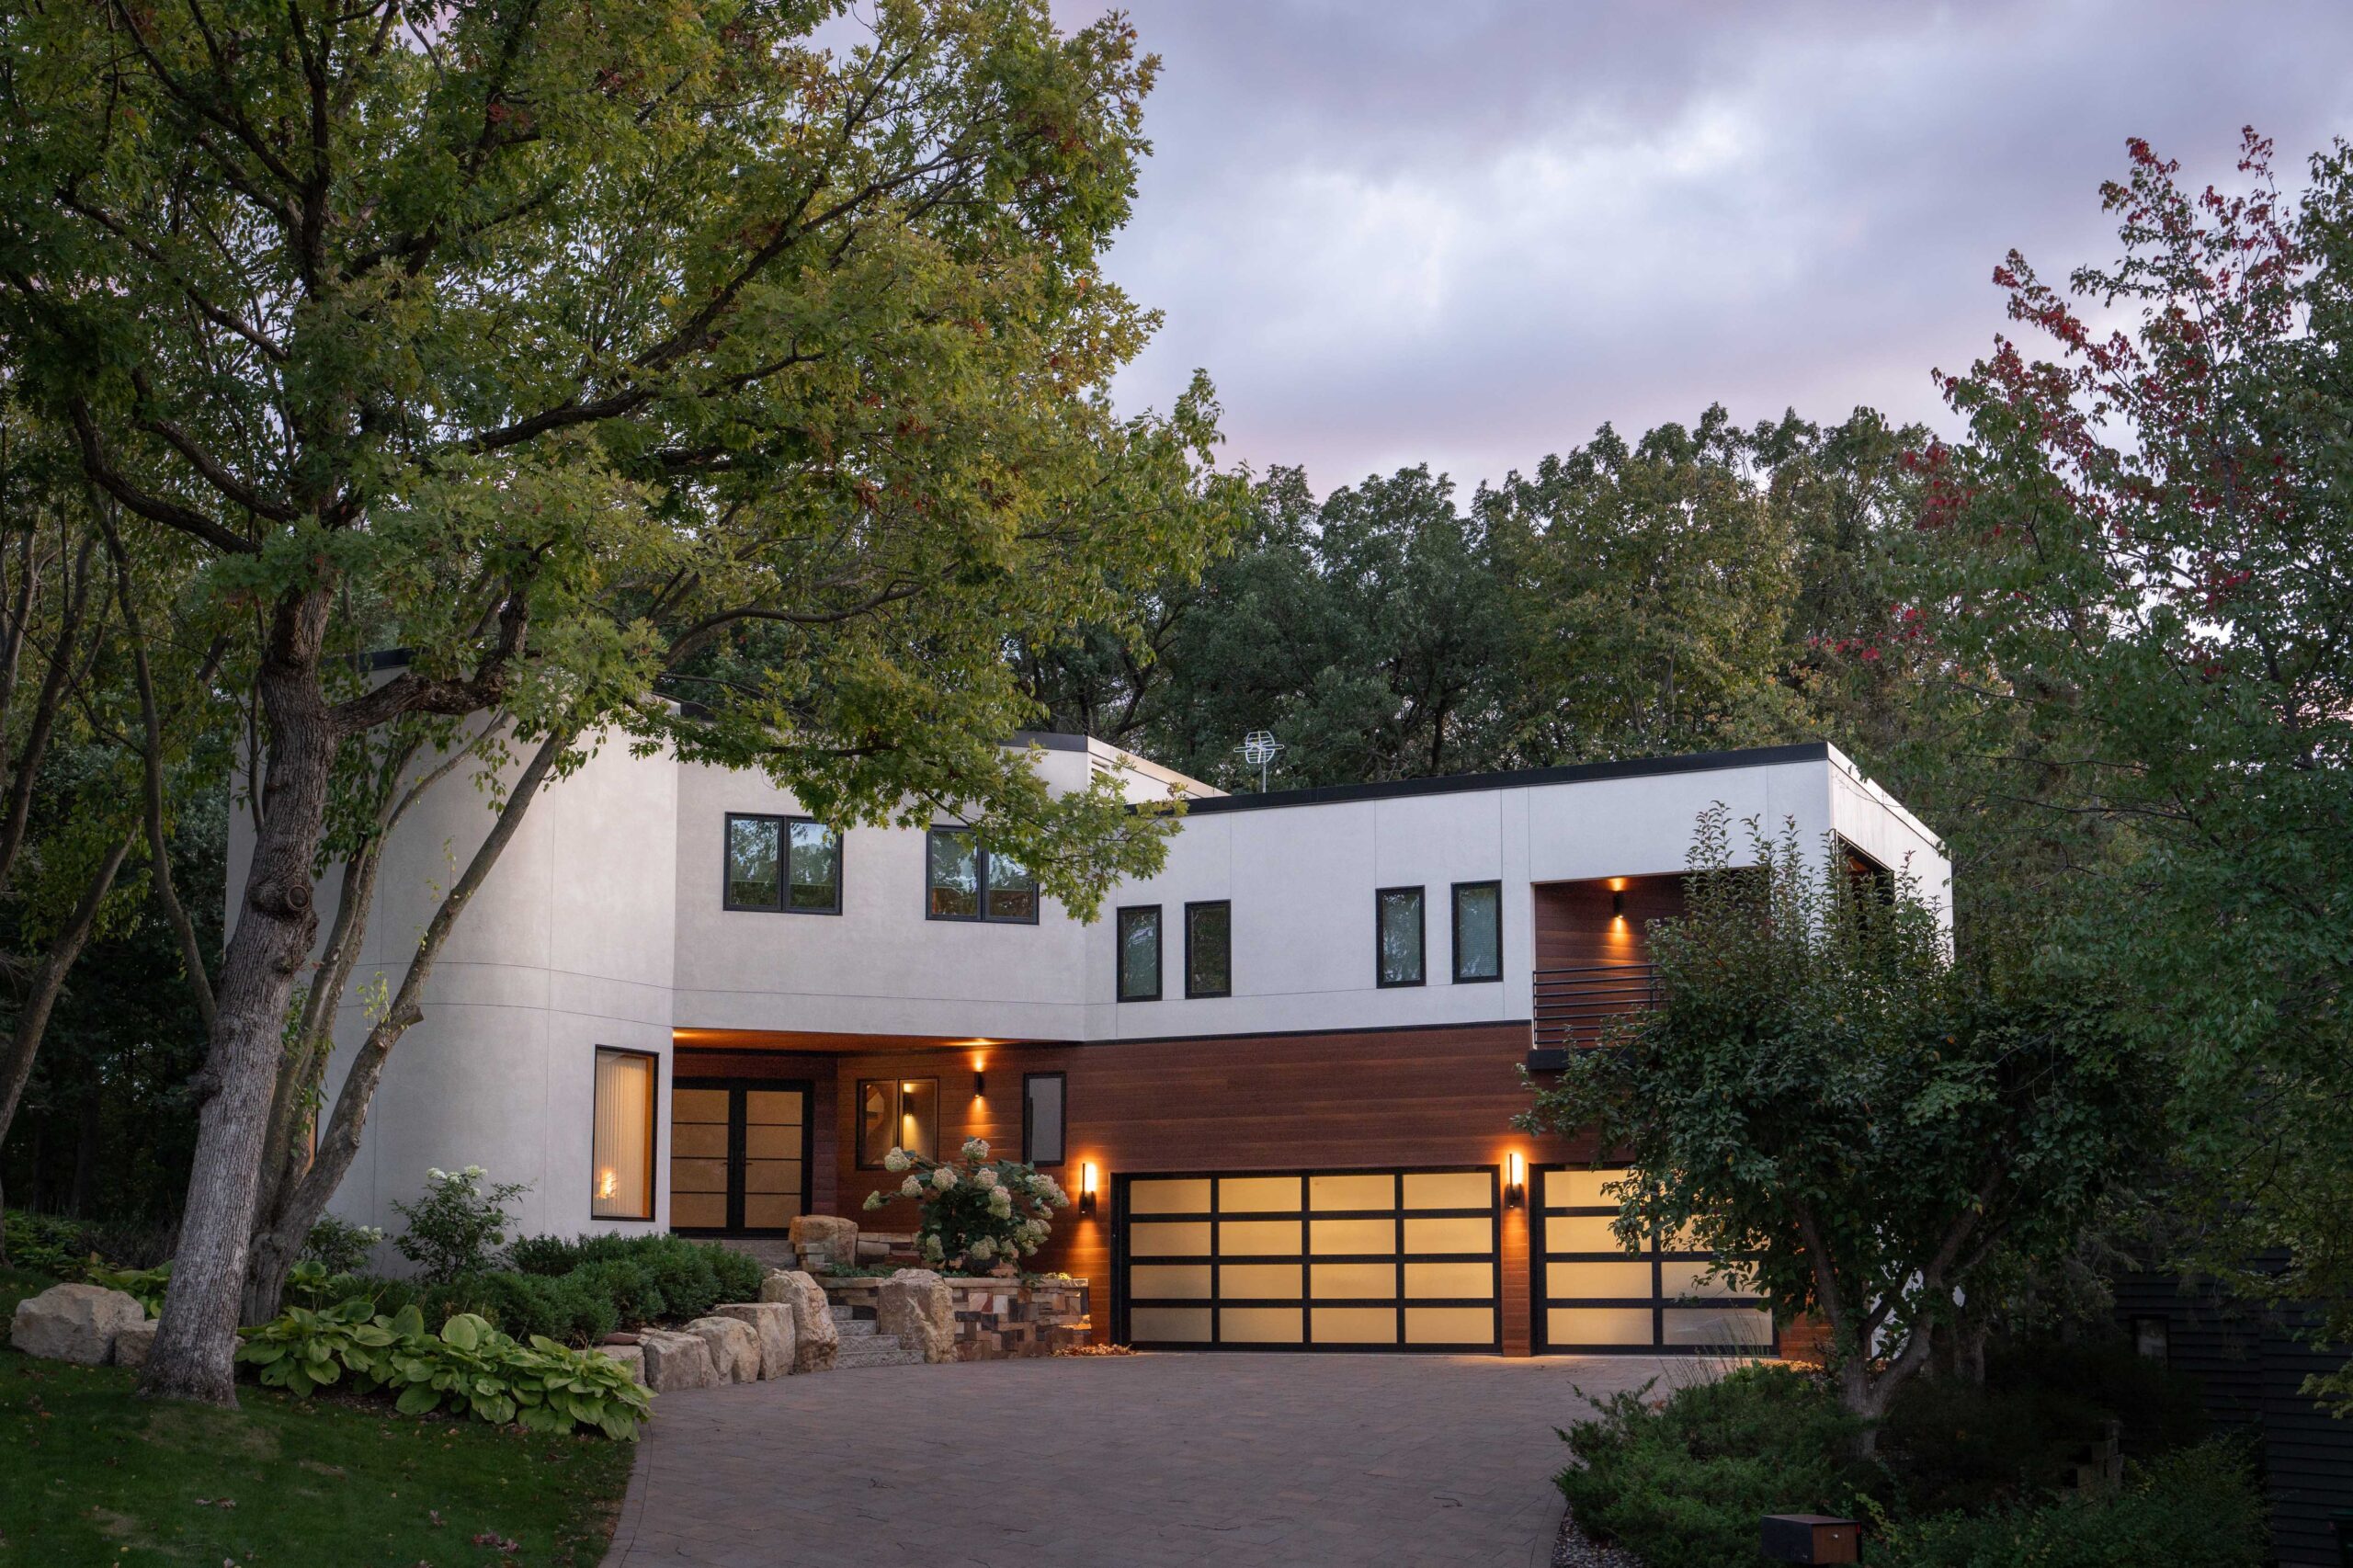 A modern home with trees.